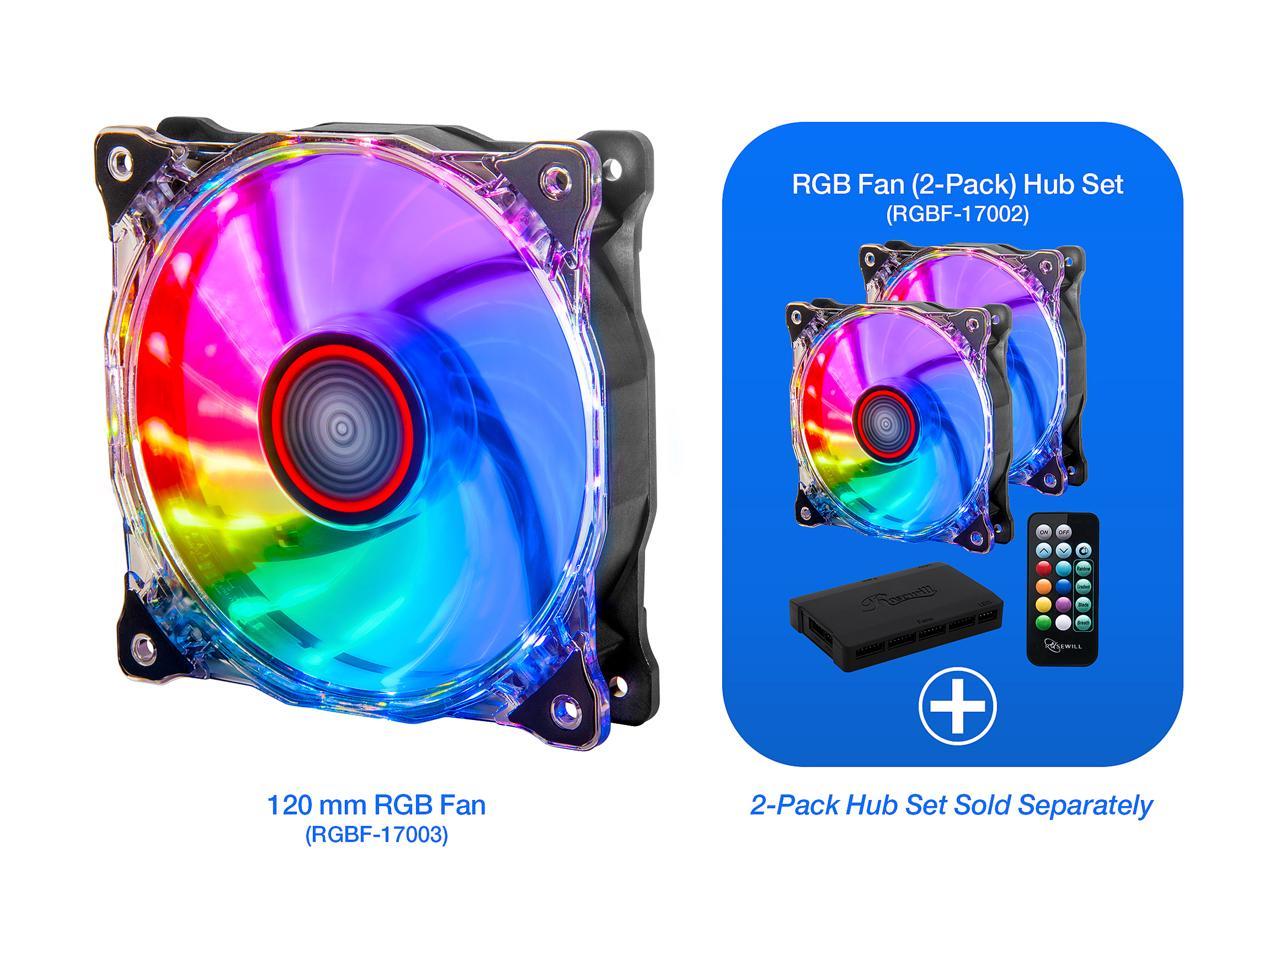 Rosewill 120 mm RGB Case Fan RGBF-17003. True RGB Color Ultra Quiet Cooling Fan with Long Life Sleeve Bearing. Standard Size 120mm Case Fan Compatible with Rosewill RGB Fan Hub